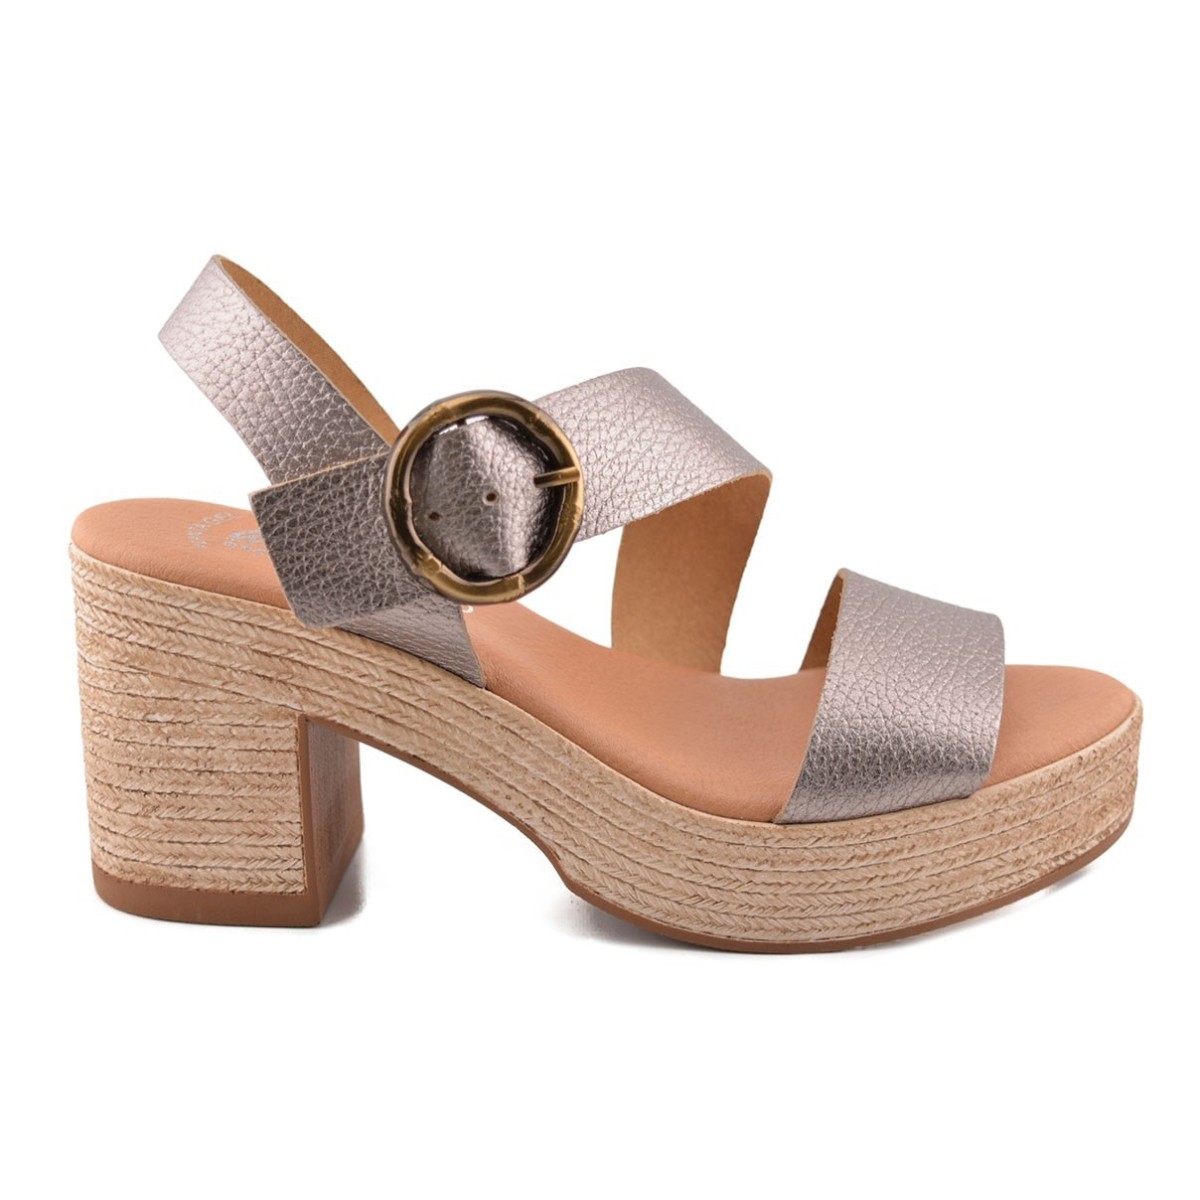 Taupe leather sandals with high heel by Amelie